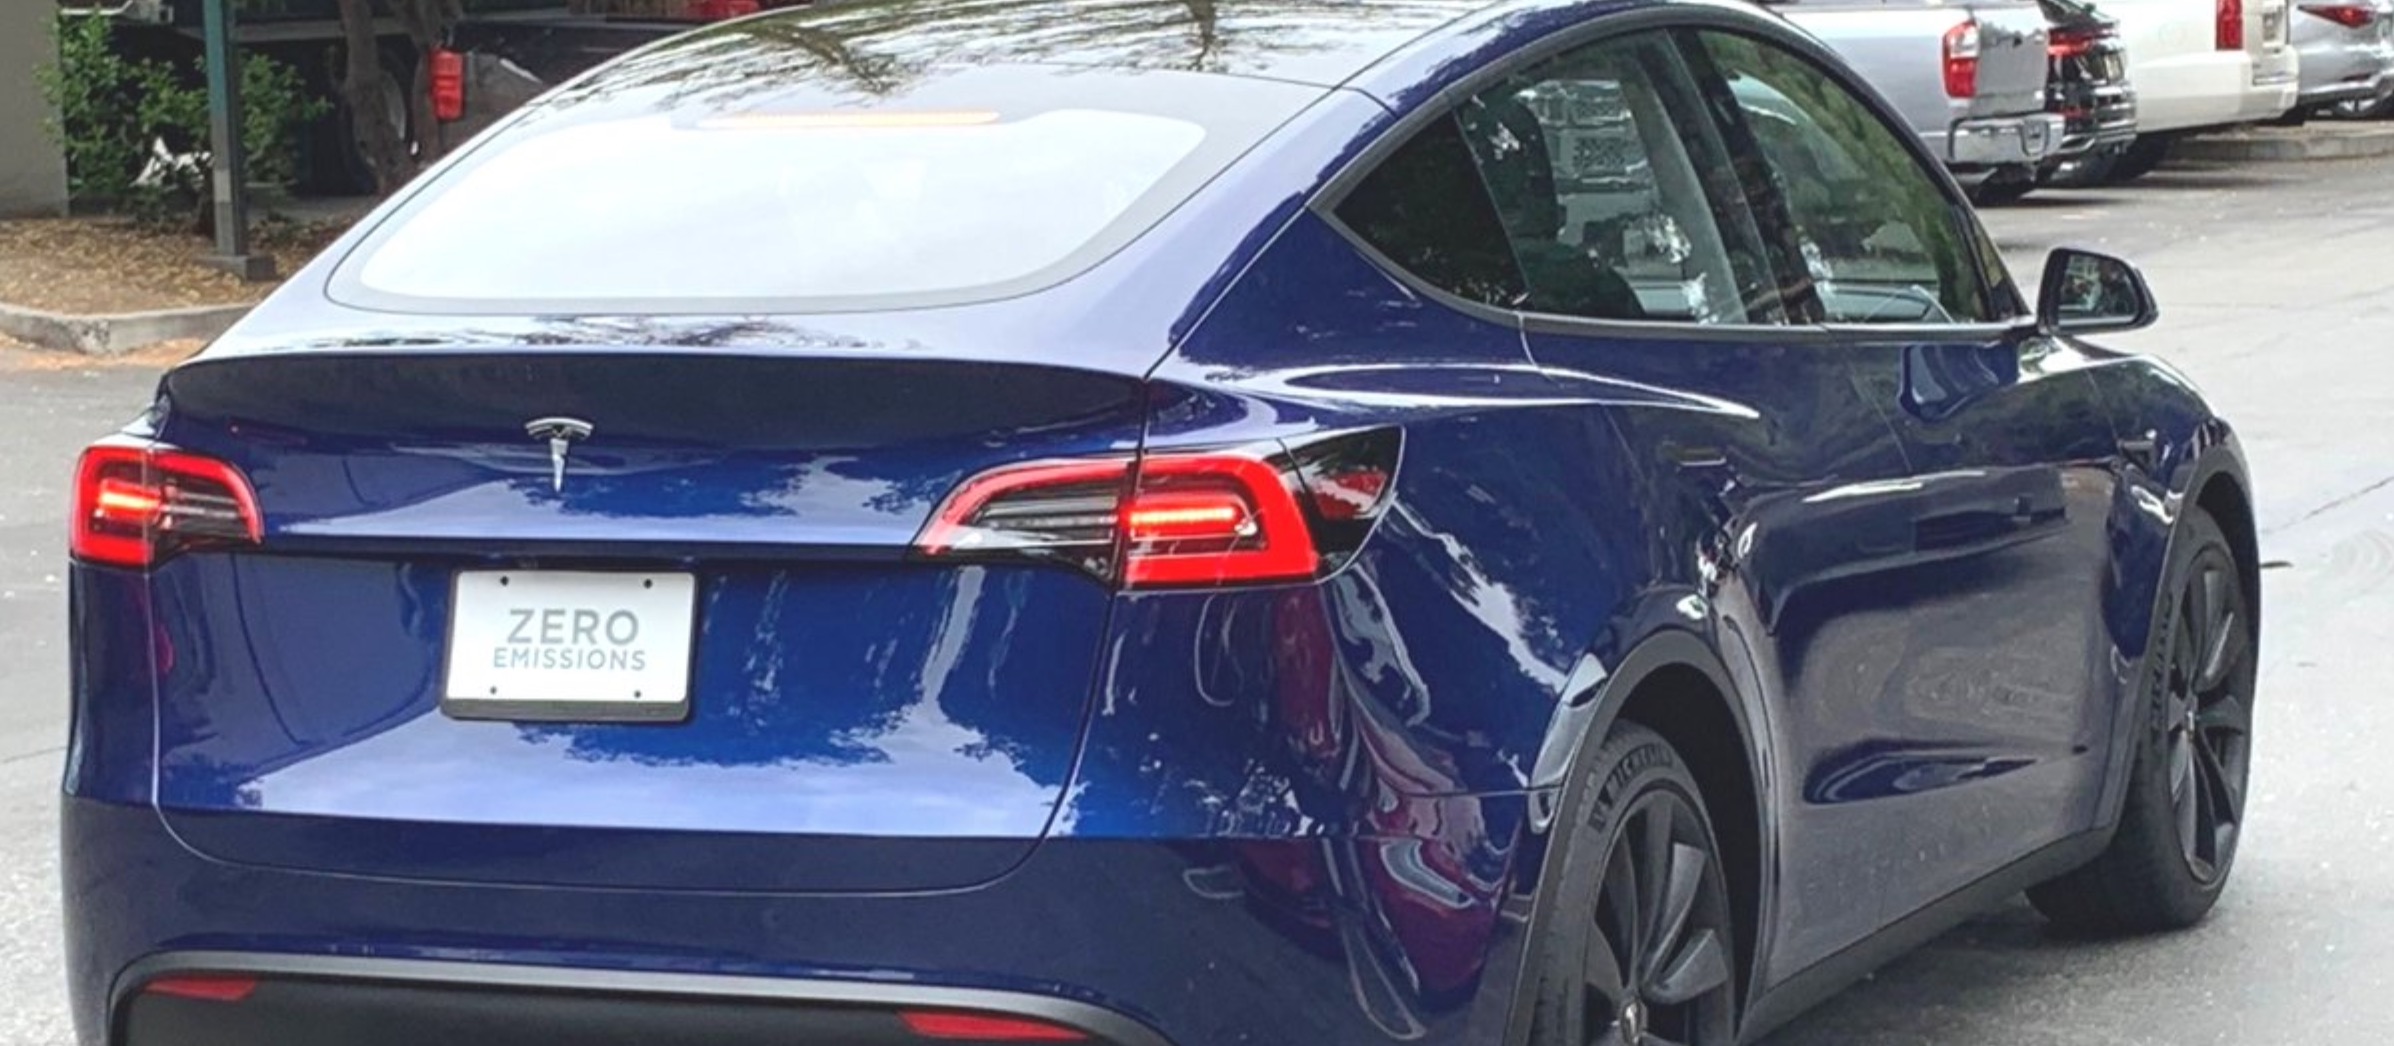 Tesla Model Y prototype spotted in the wild for the first time